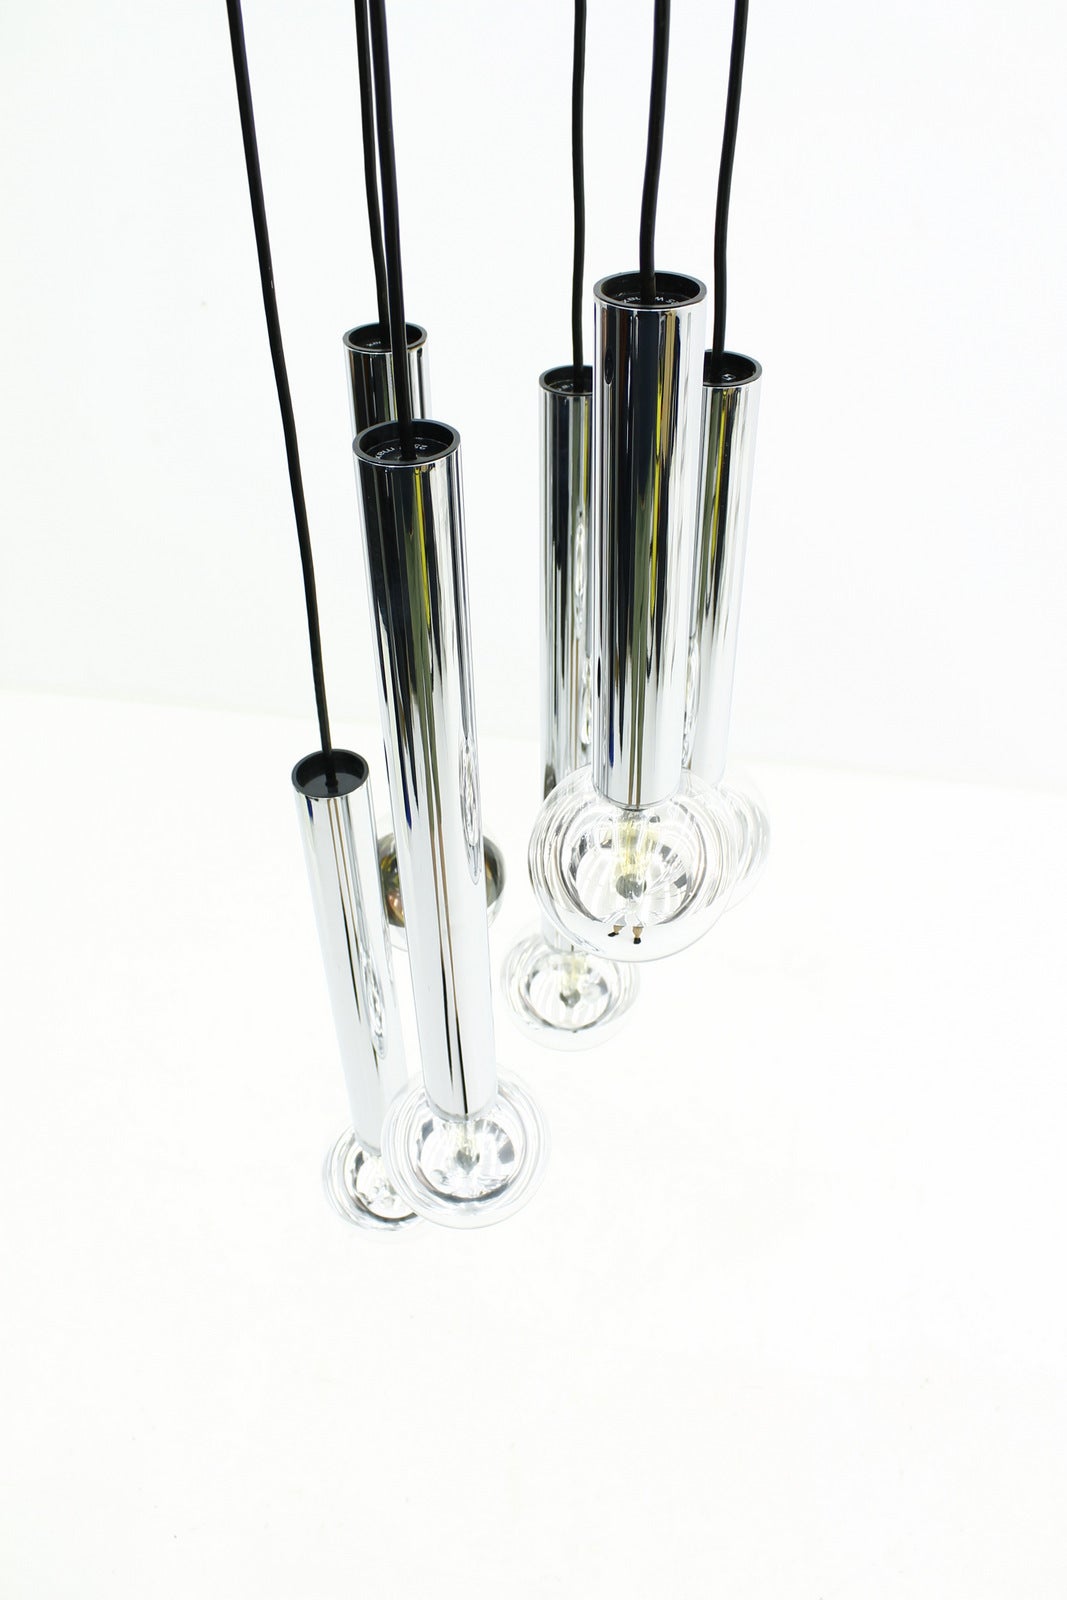 German Chrome and Glass Cascade Chandelier by Motoko Ishii for Staff, 1970s For Sale